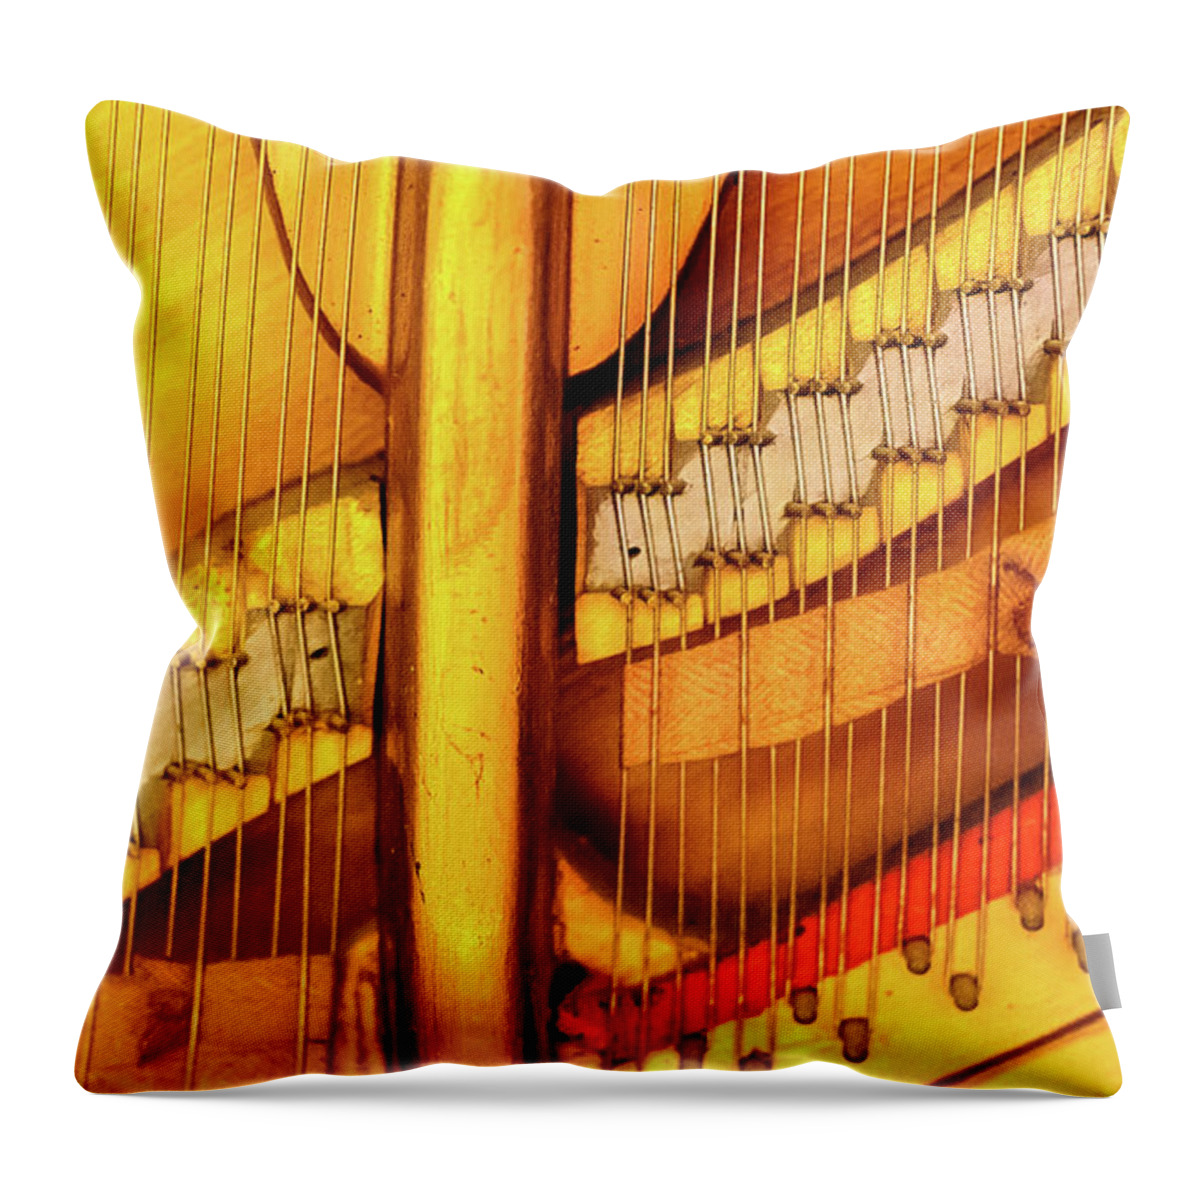 Harp Throw Pillow featuring the photograph Piano 1 by Rebecca Cozart